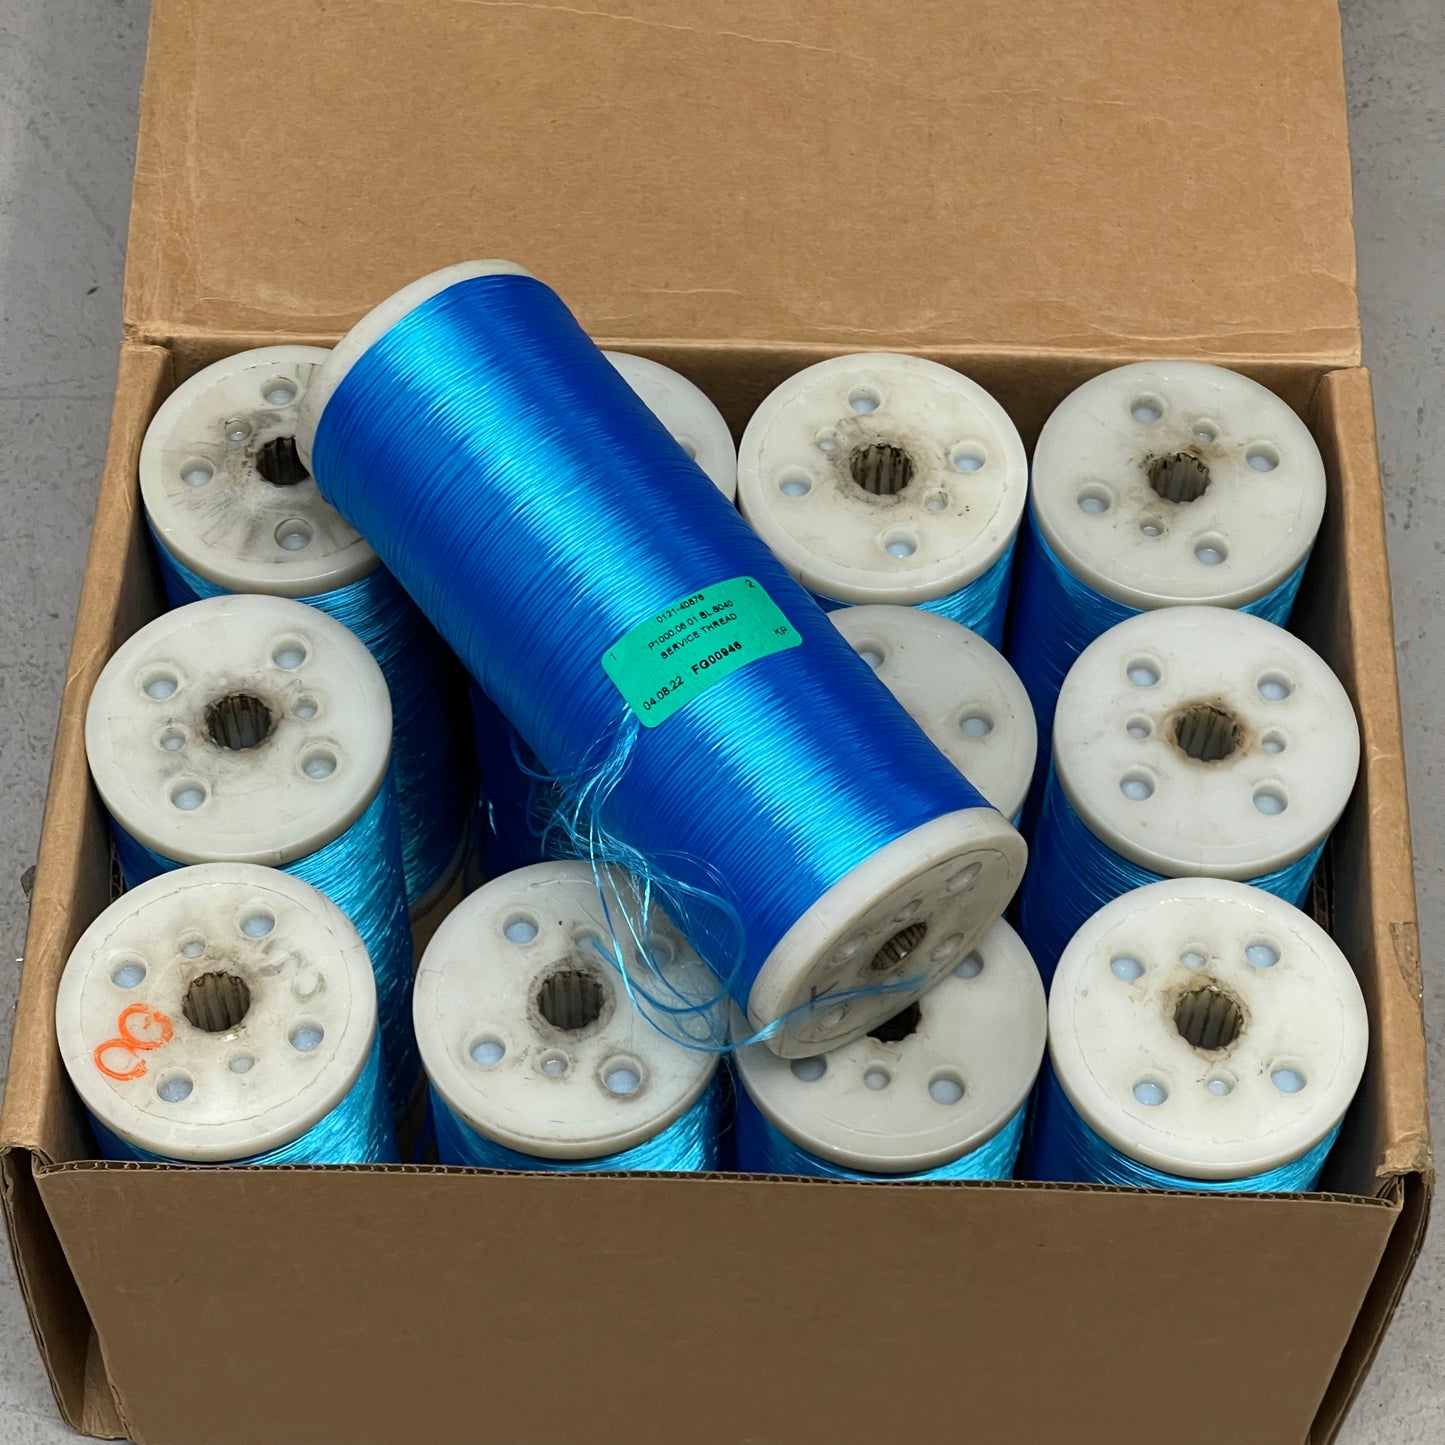 SERVICE THREAD 12/5 Blue Poly Thread for Ind. Sewing Machines & Systems P1000